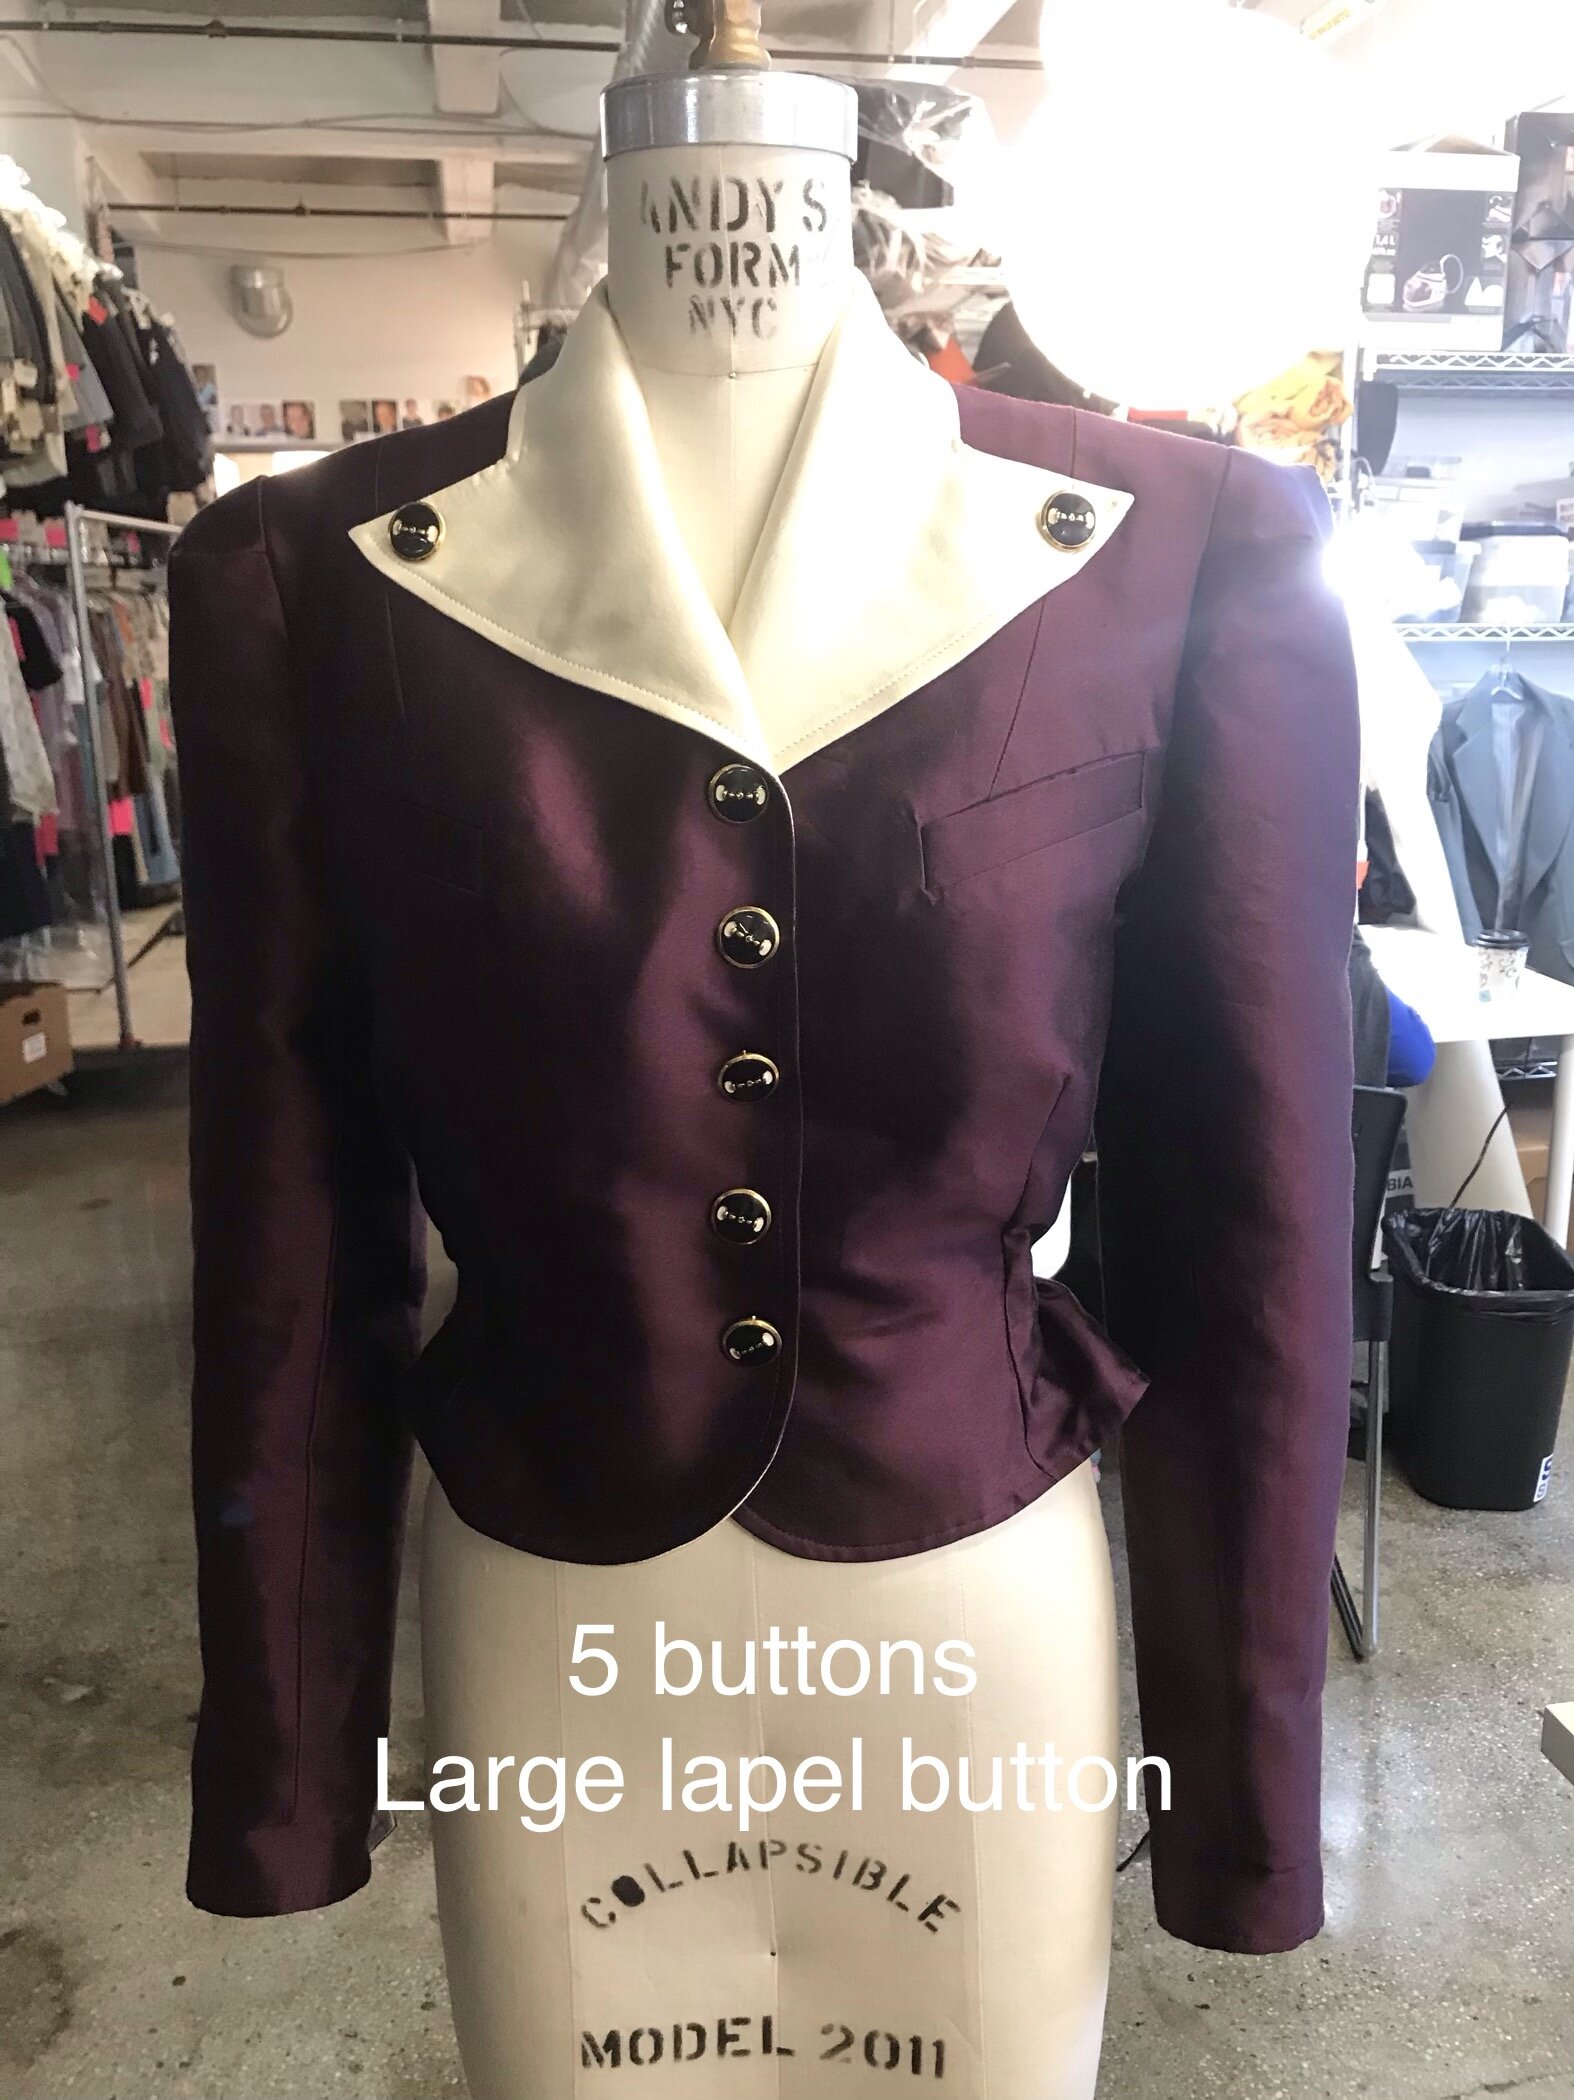 In process - deciding button placement